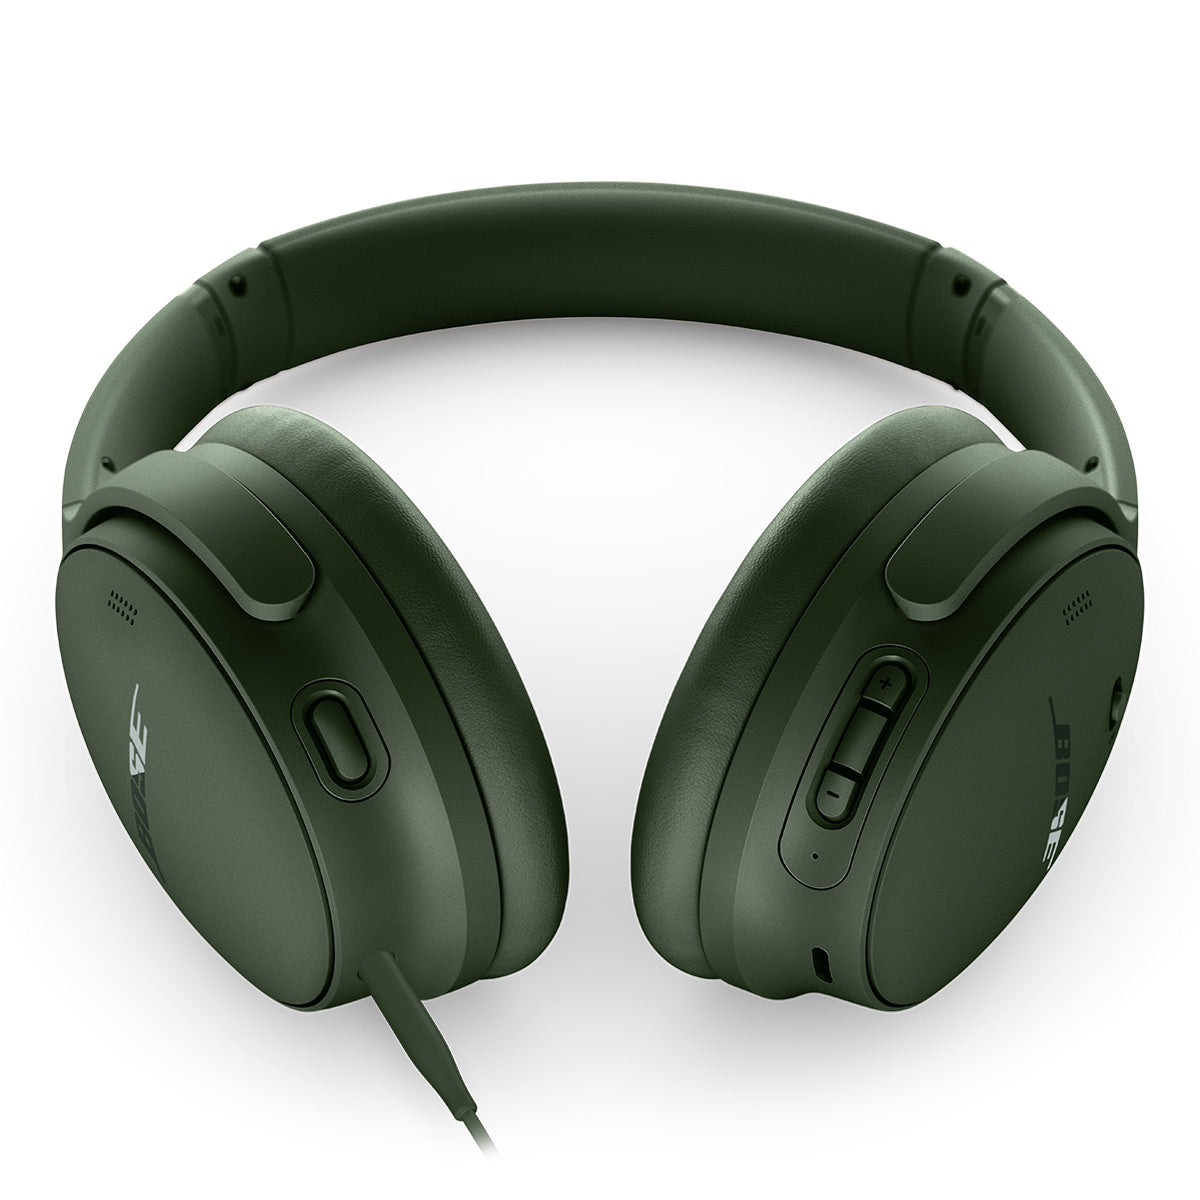 Bose QuietComfort Headphones with Active Noise Cancellation - Pair (Cypress Green)